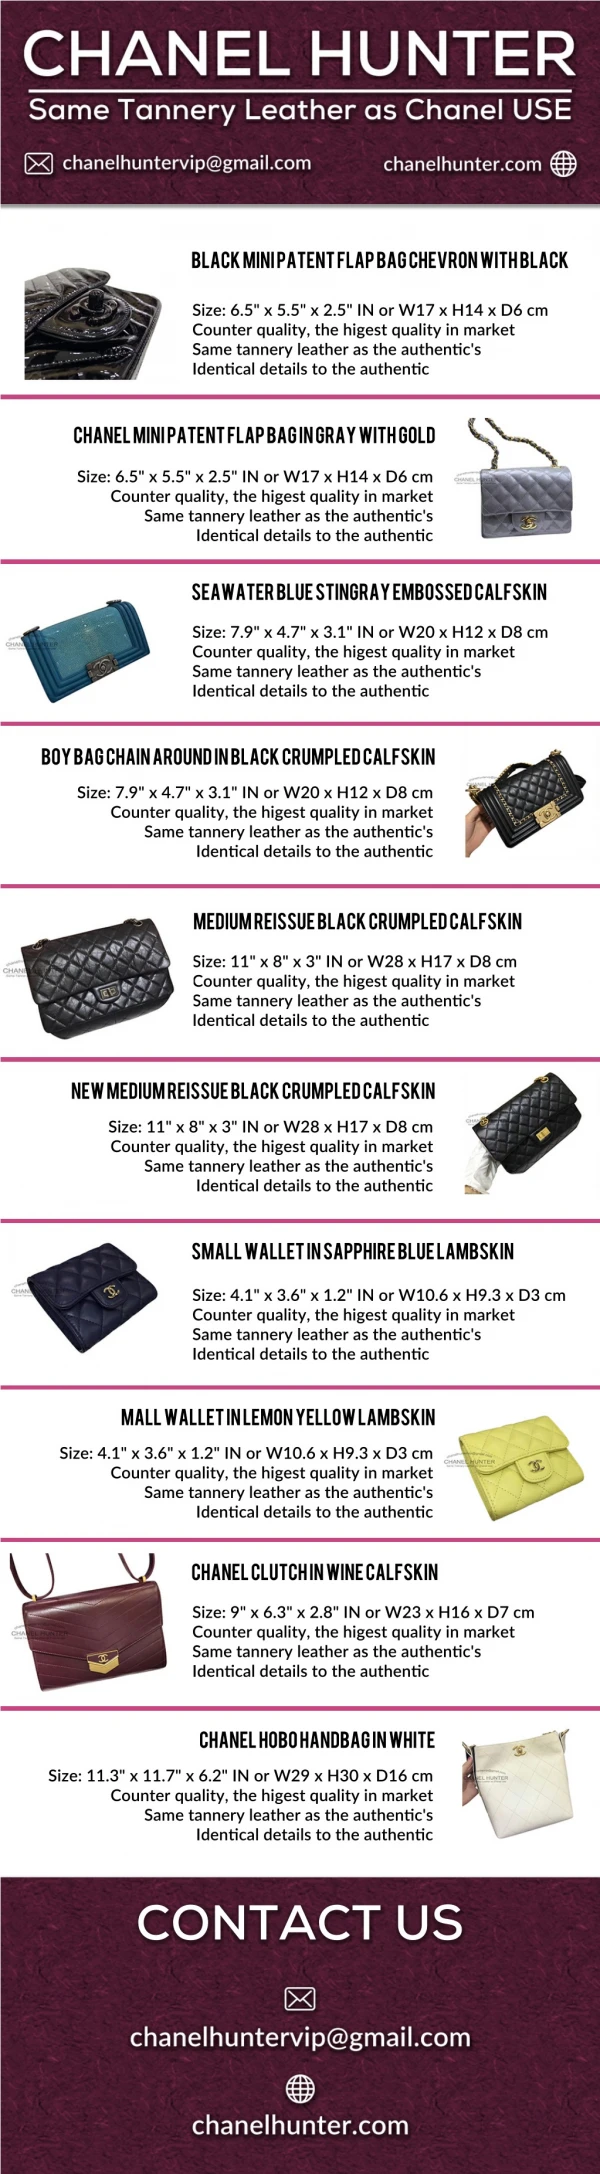 Buy The Best Chanel Replica Bags Online and Other Chanel Inspired Outlets